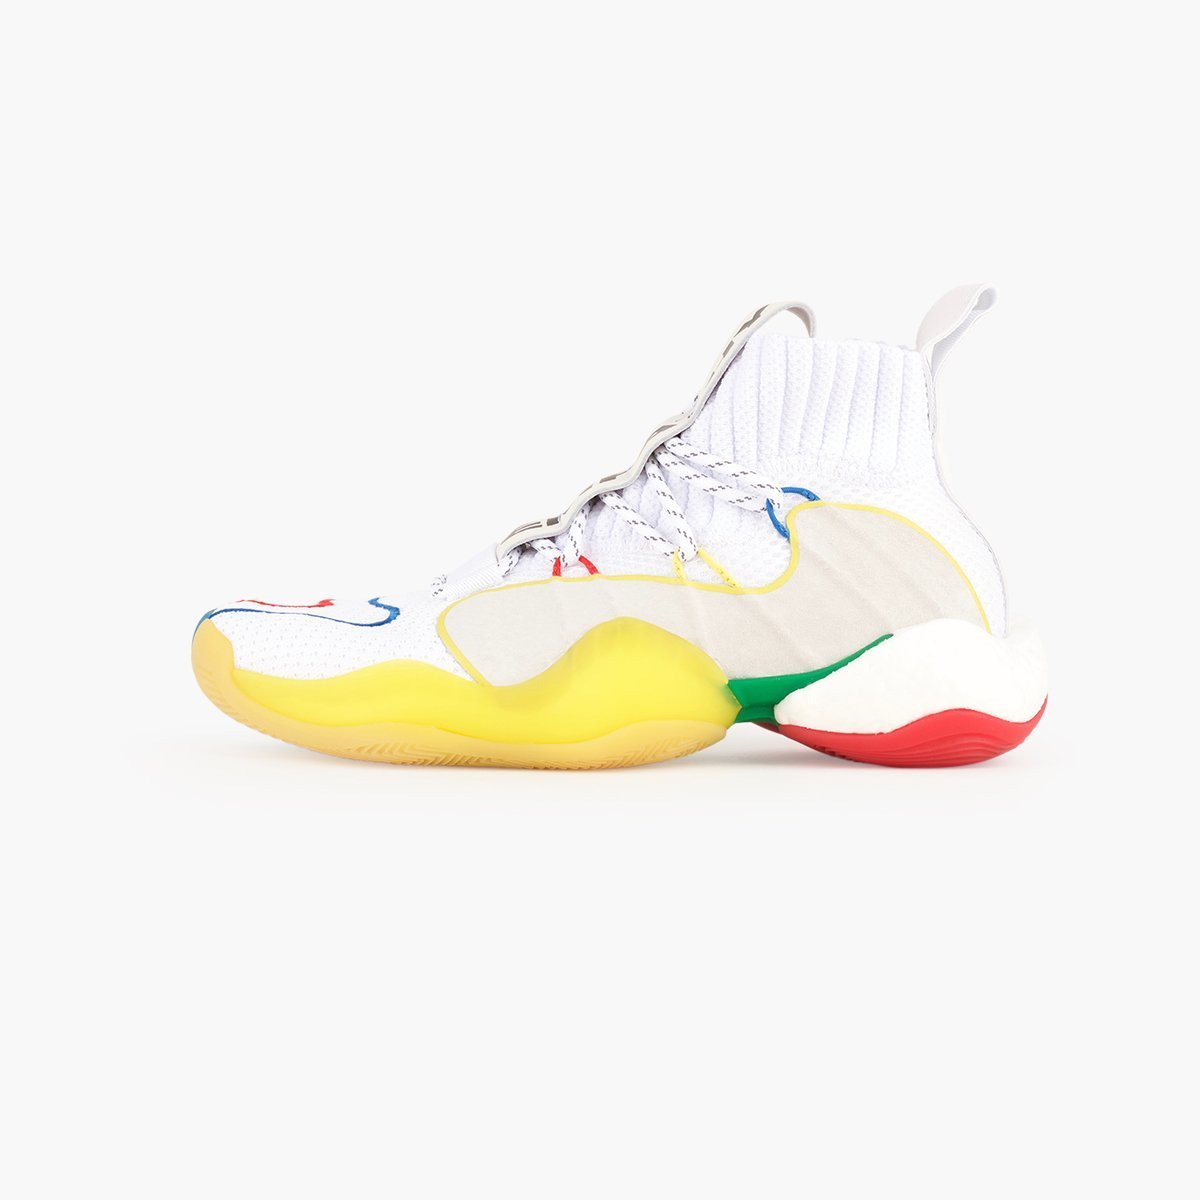 adidas Crazy BYW LVL x PW-SUEDE Store